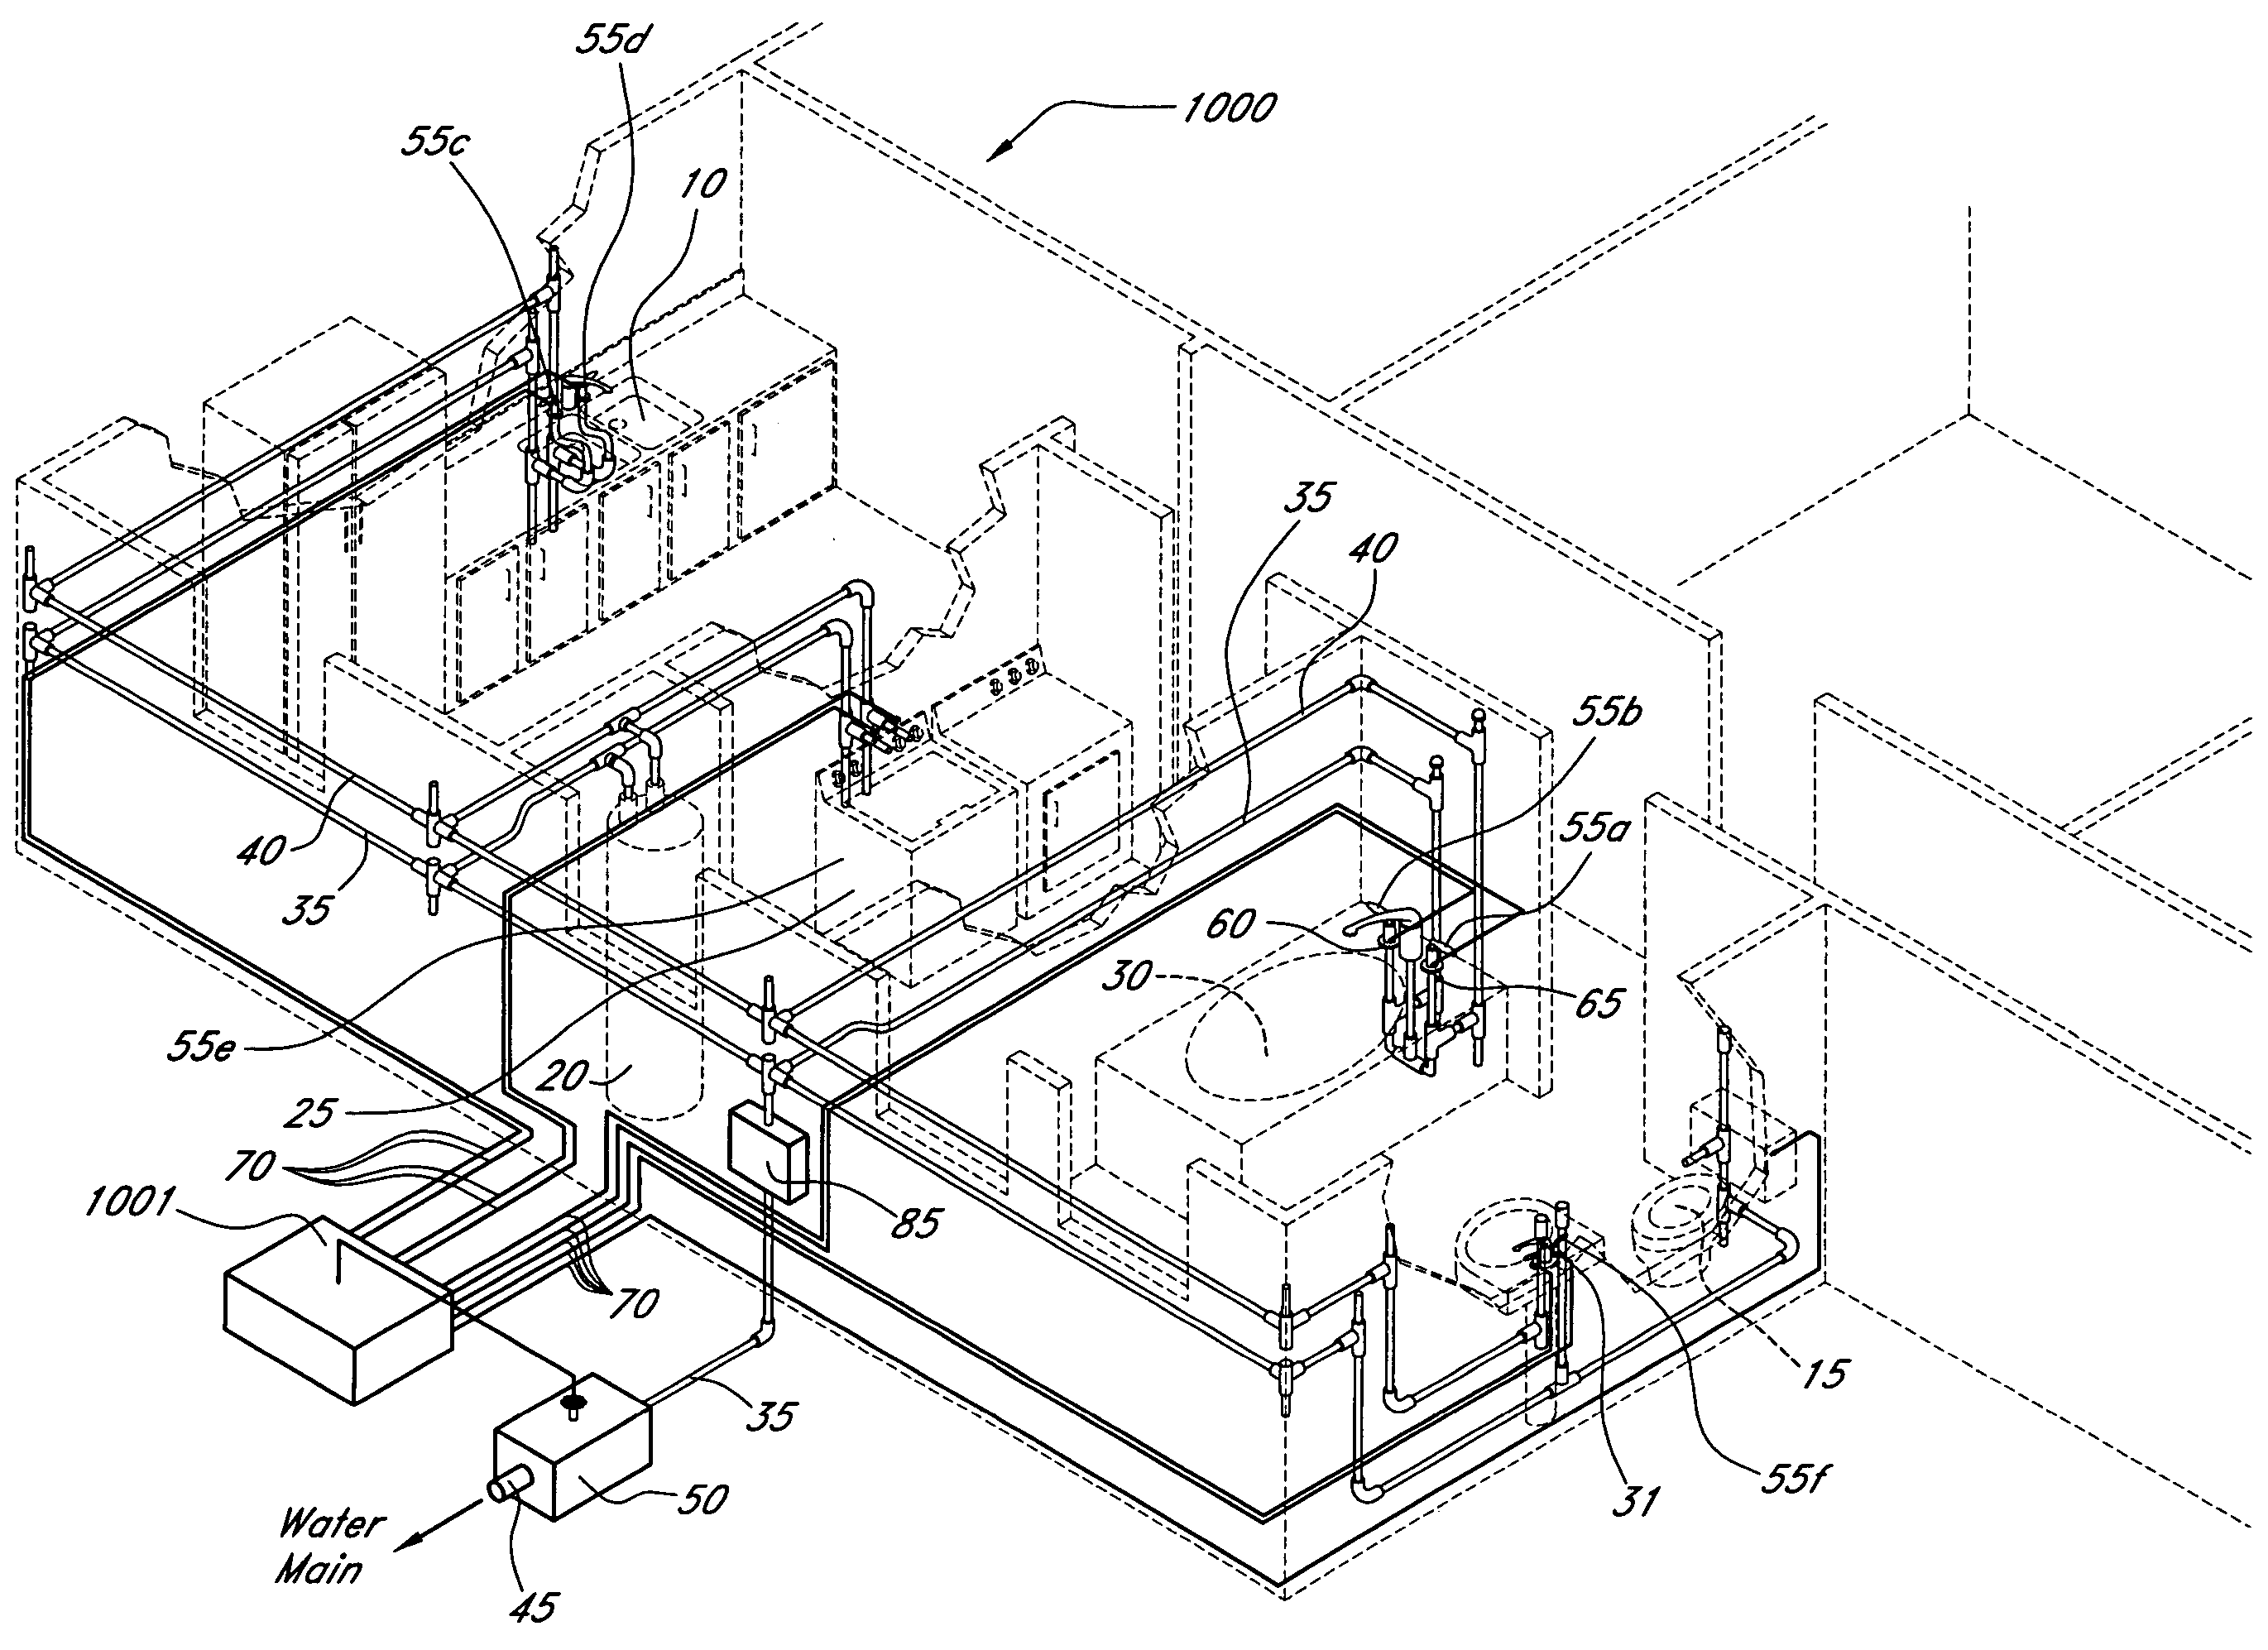 Water leak detection and prevention systems and methods